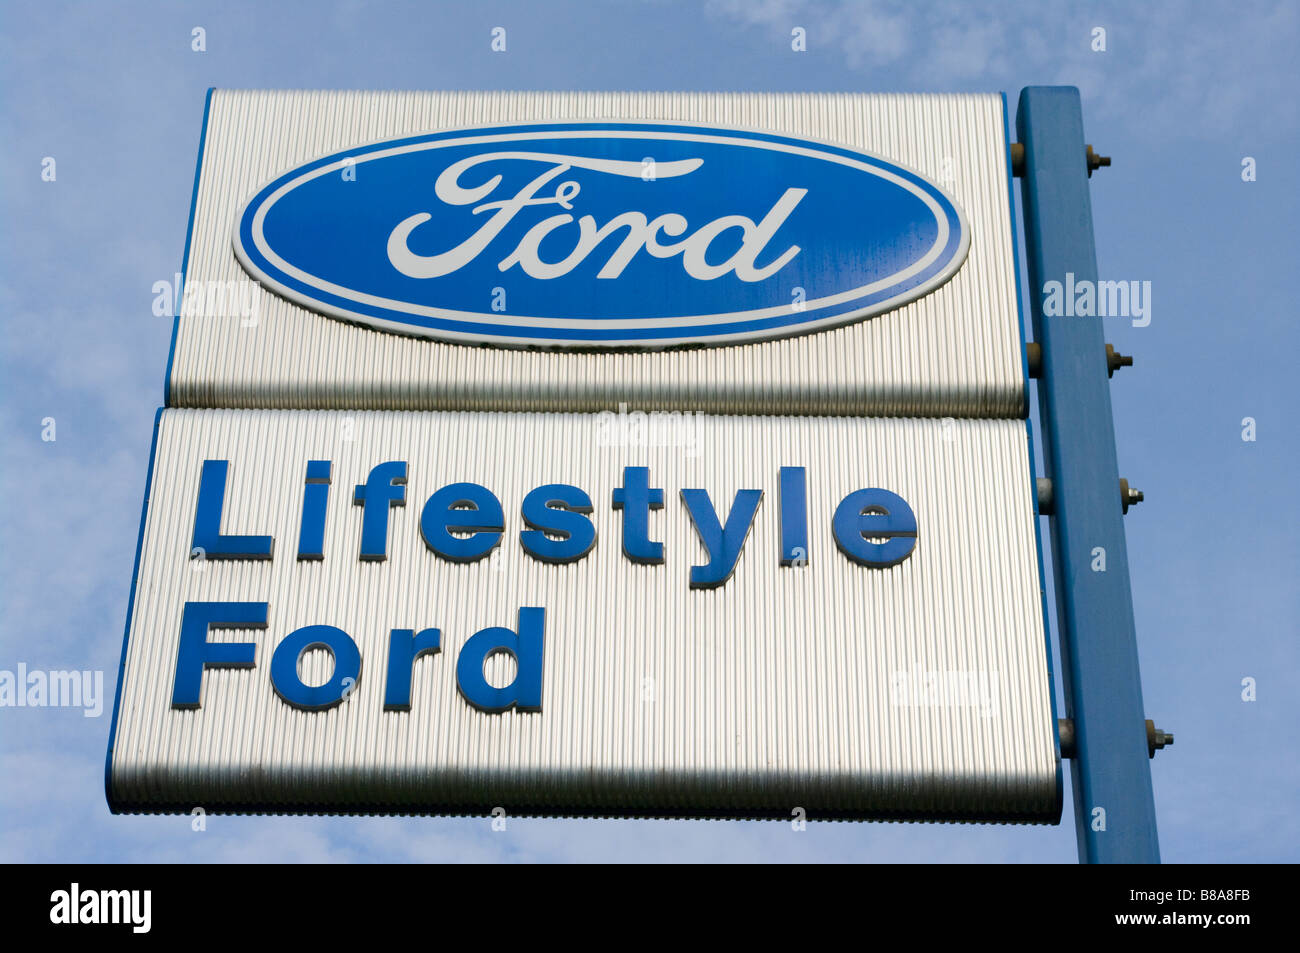 Ford Car Dealers Retailers Sign Against a Blue Sky 'lifestyle ford' Stock Photo